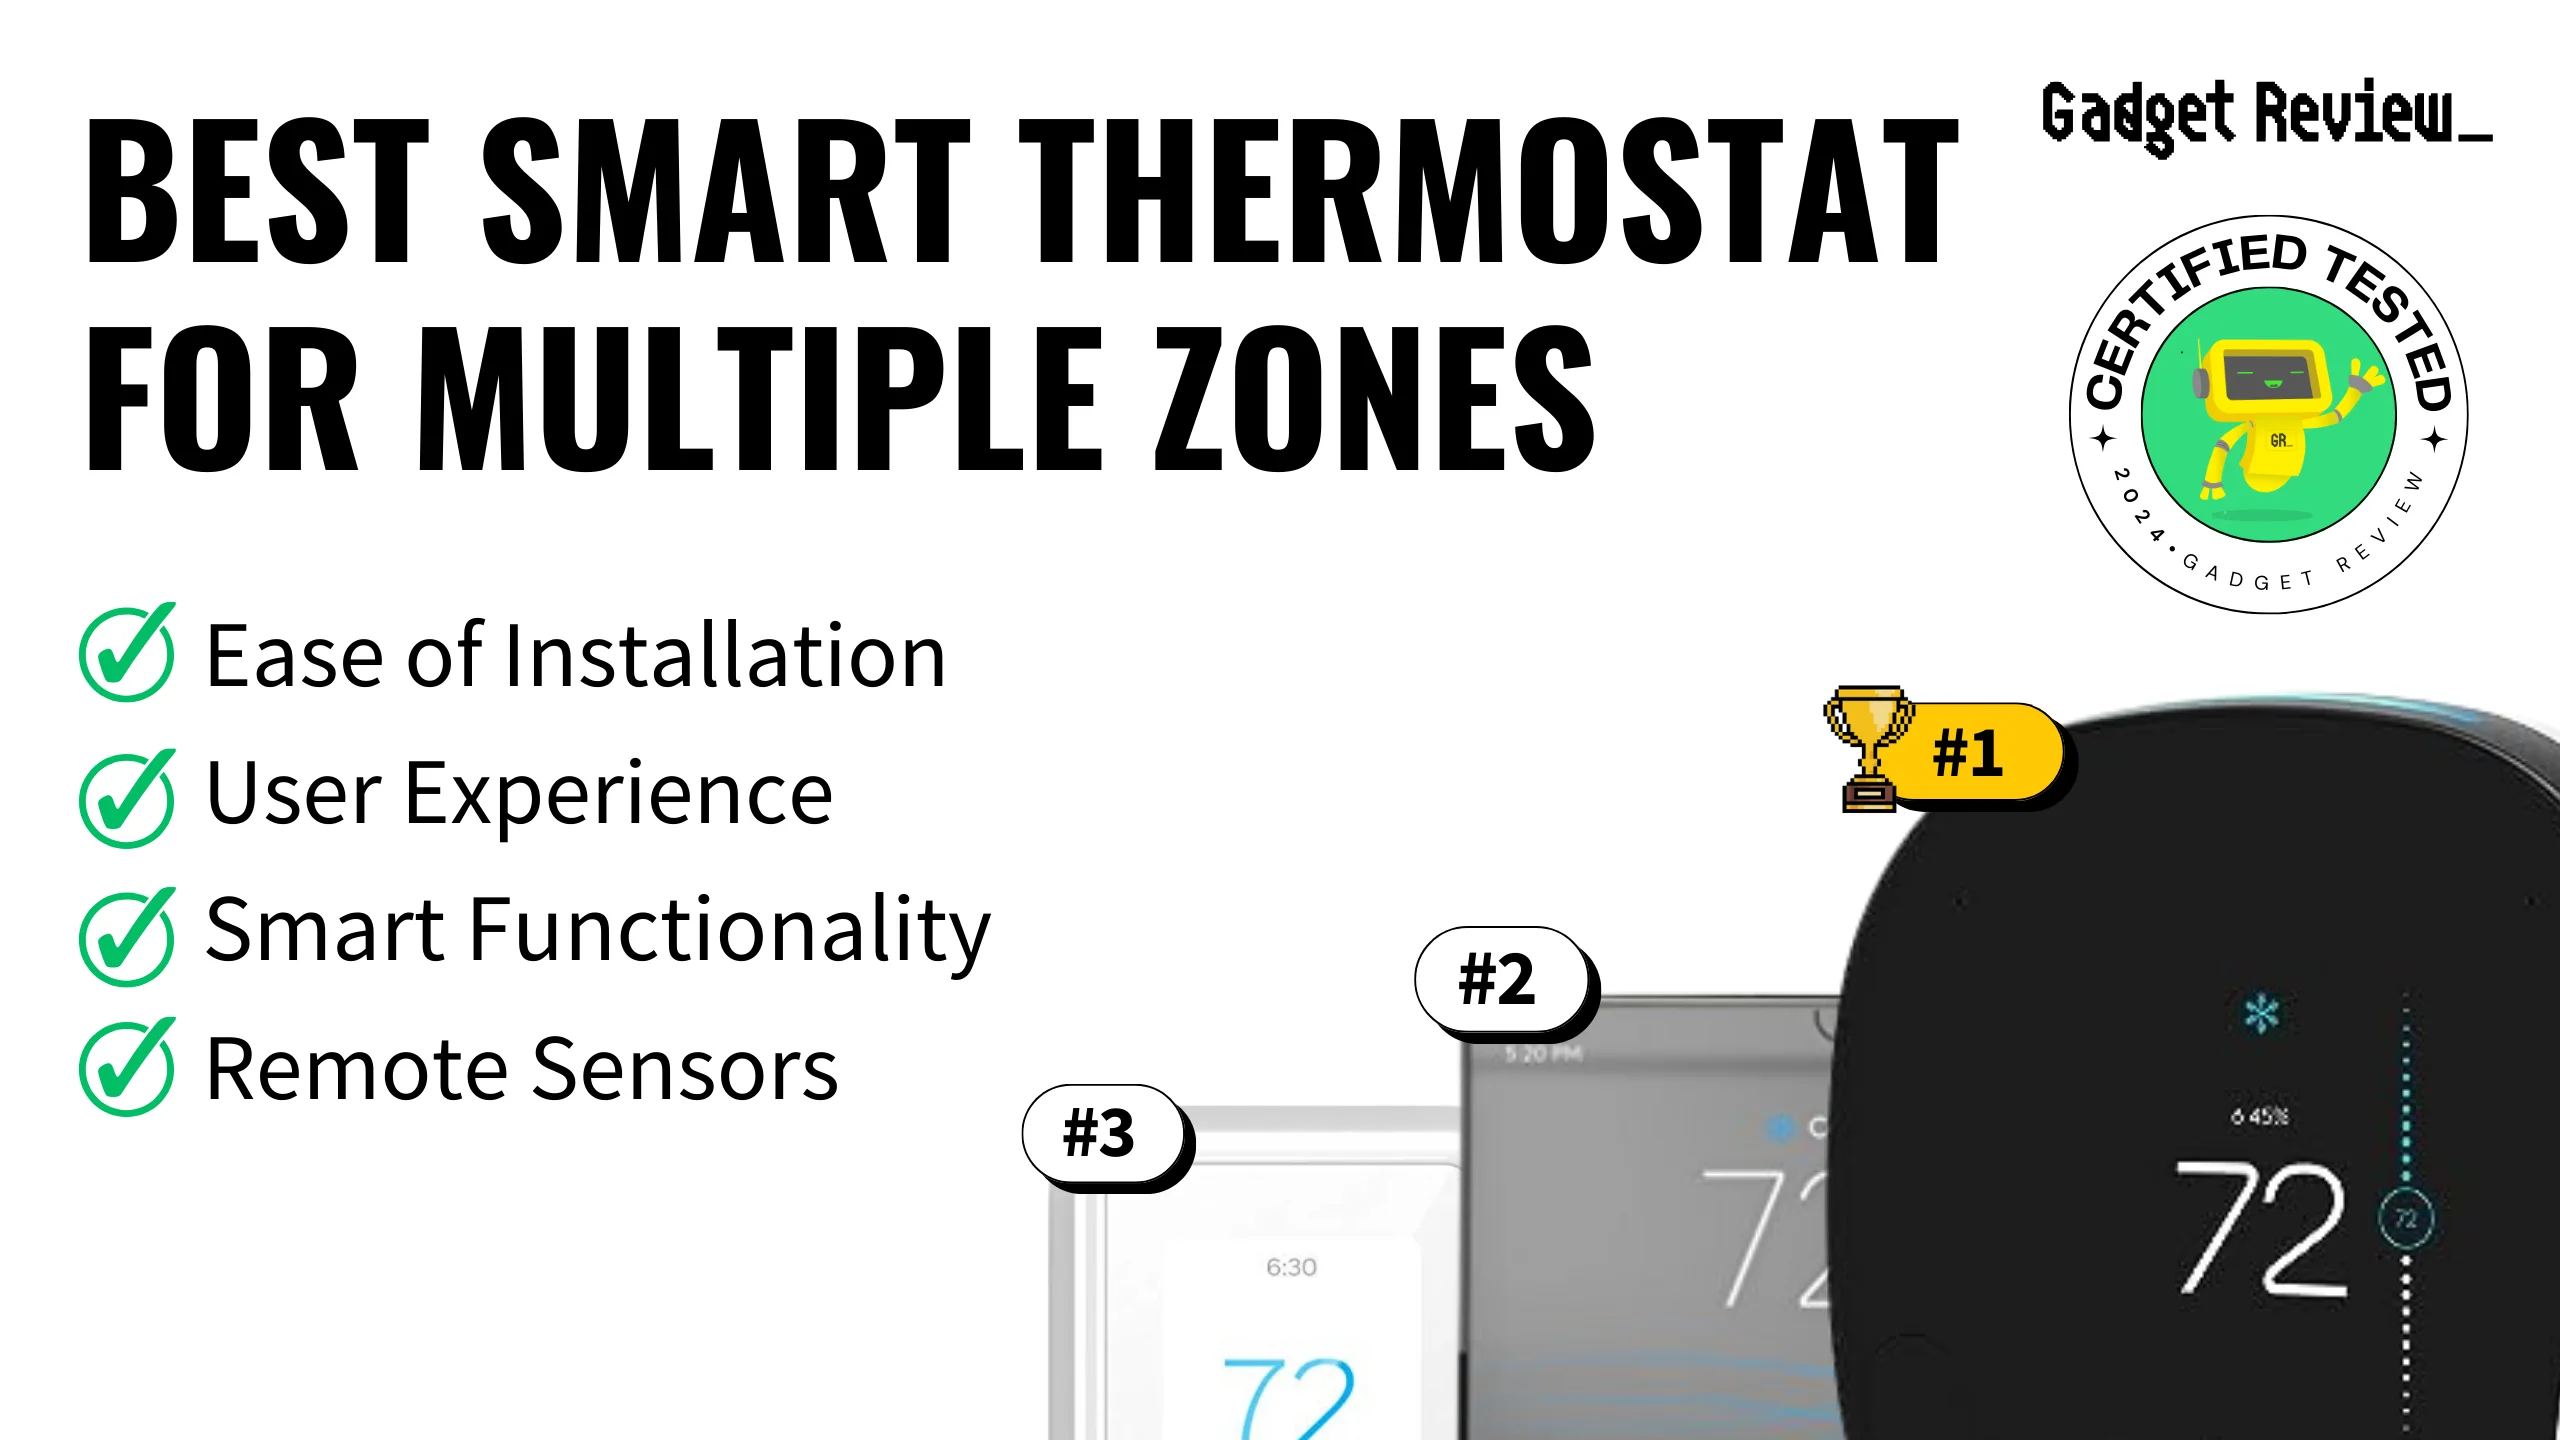 best smart thermostats for multiple zones guide that shows the top best home appliance model